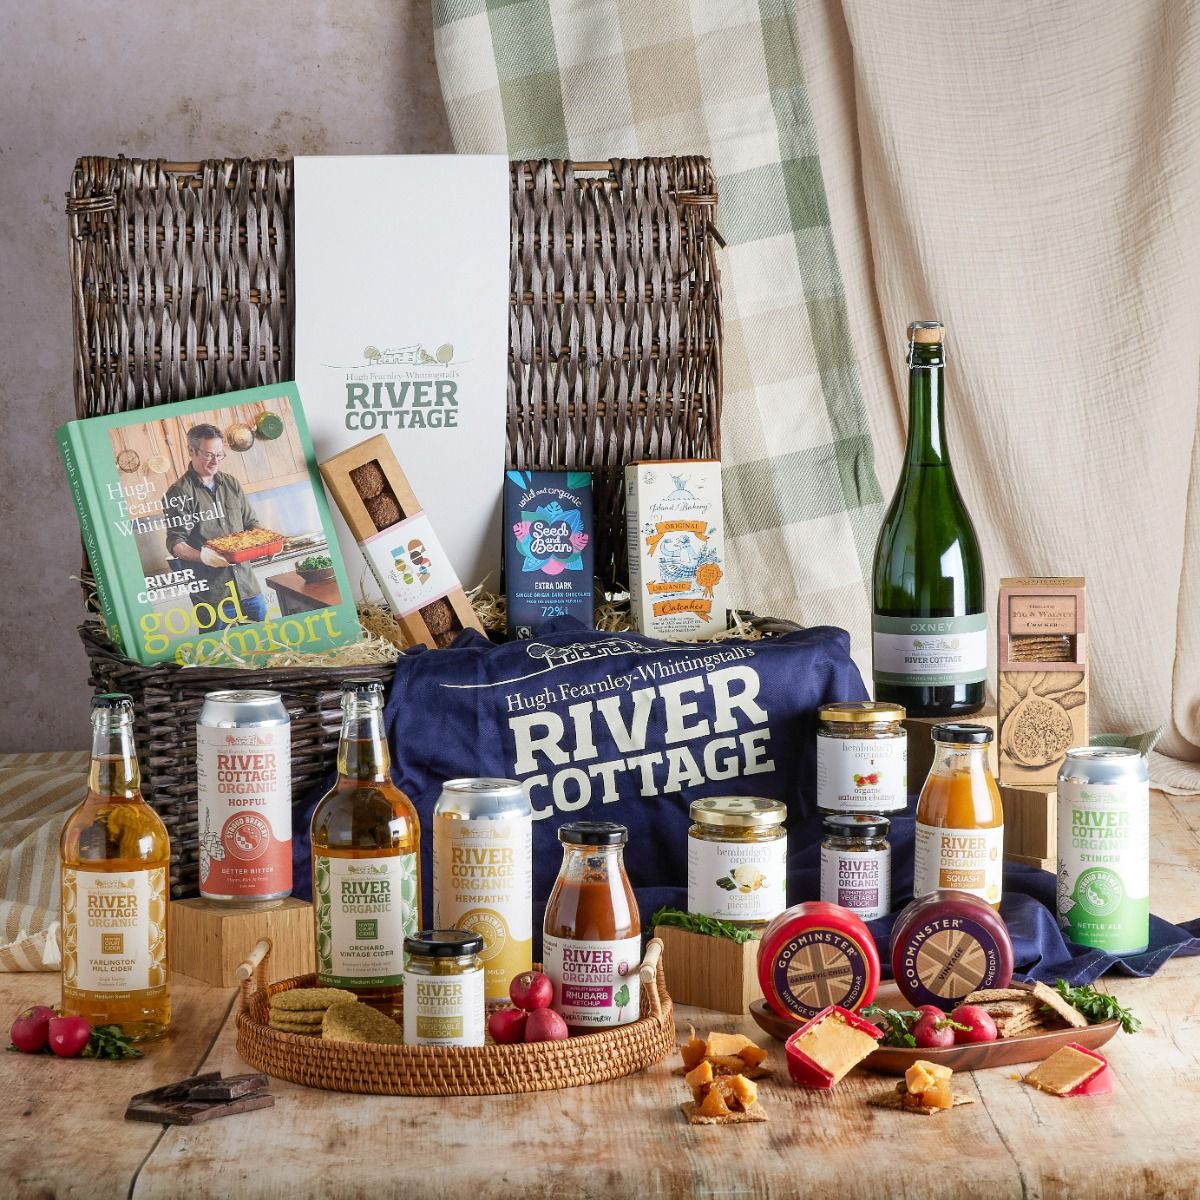 The River Cottage Hamper with a bottle of English Sparkling wine, perfect for a New Year's eve drink